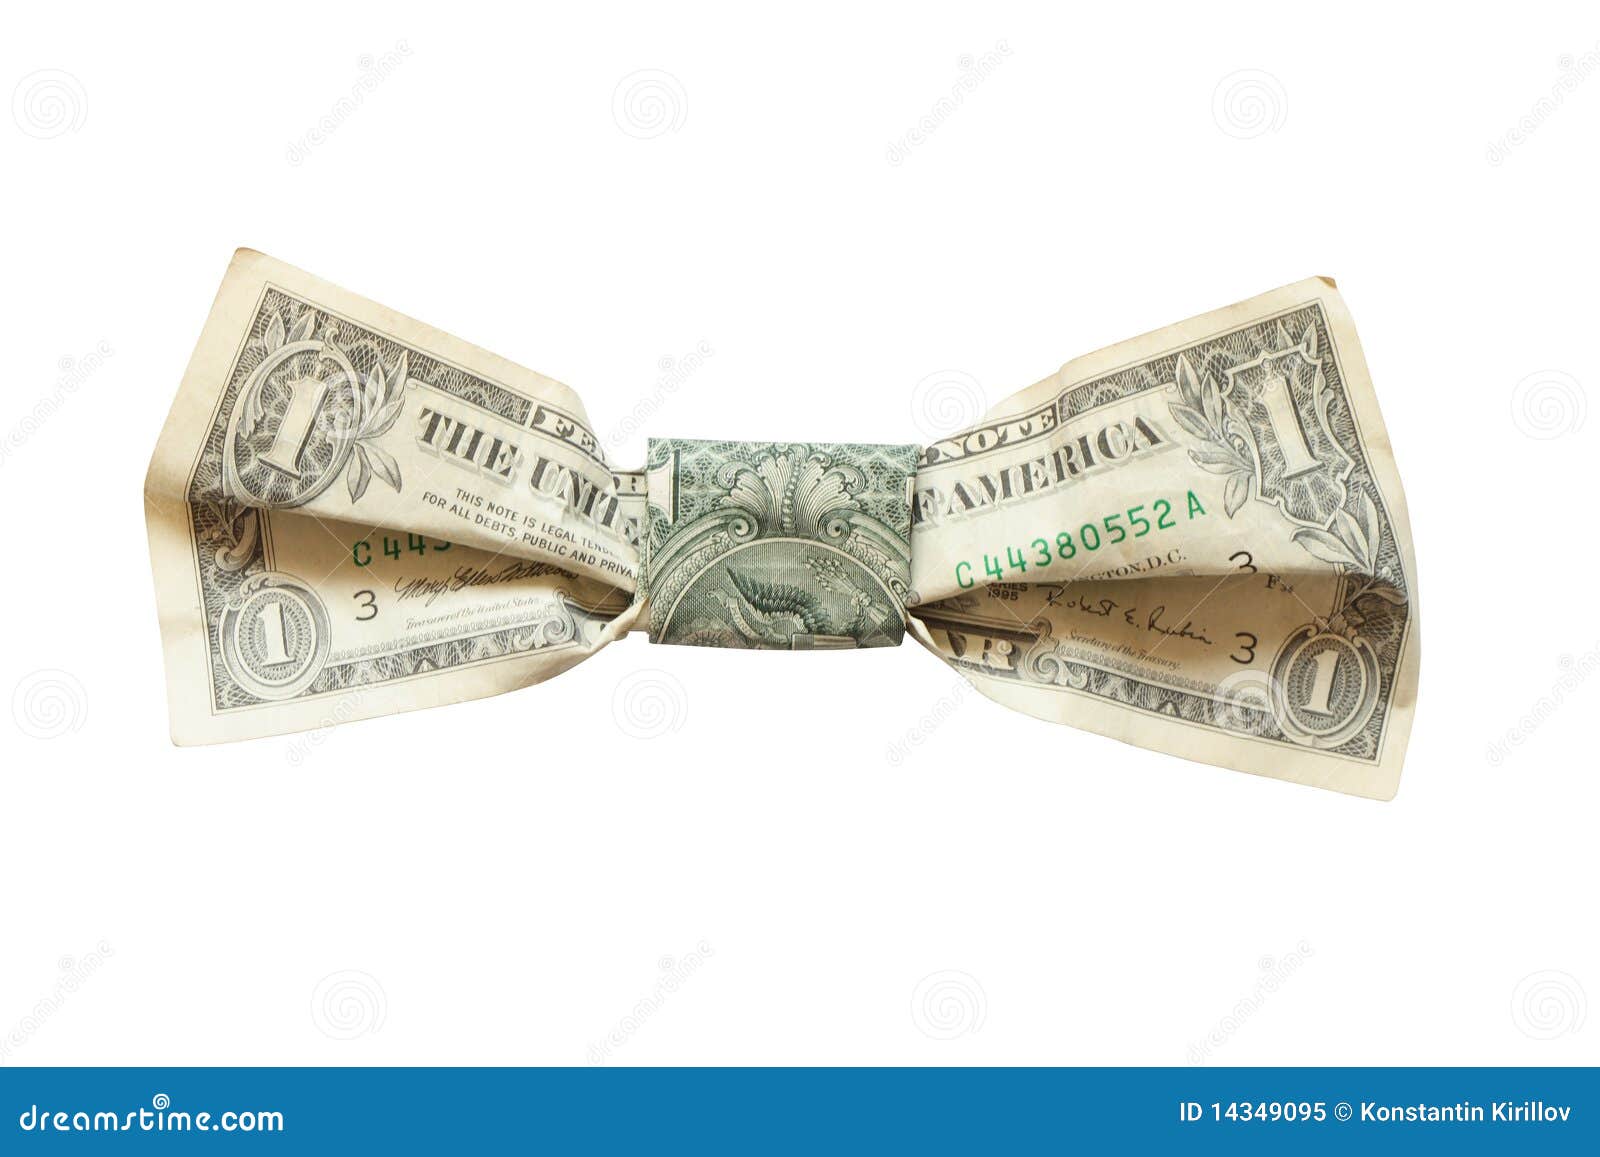 Business Bow Tie stock image. Image of money, design - 14349095